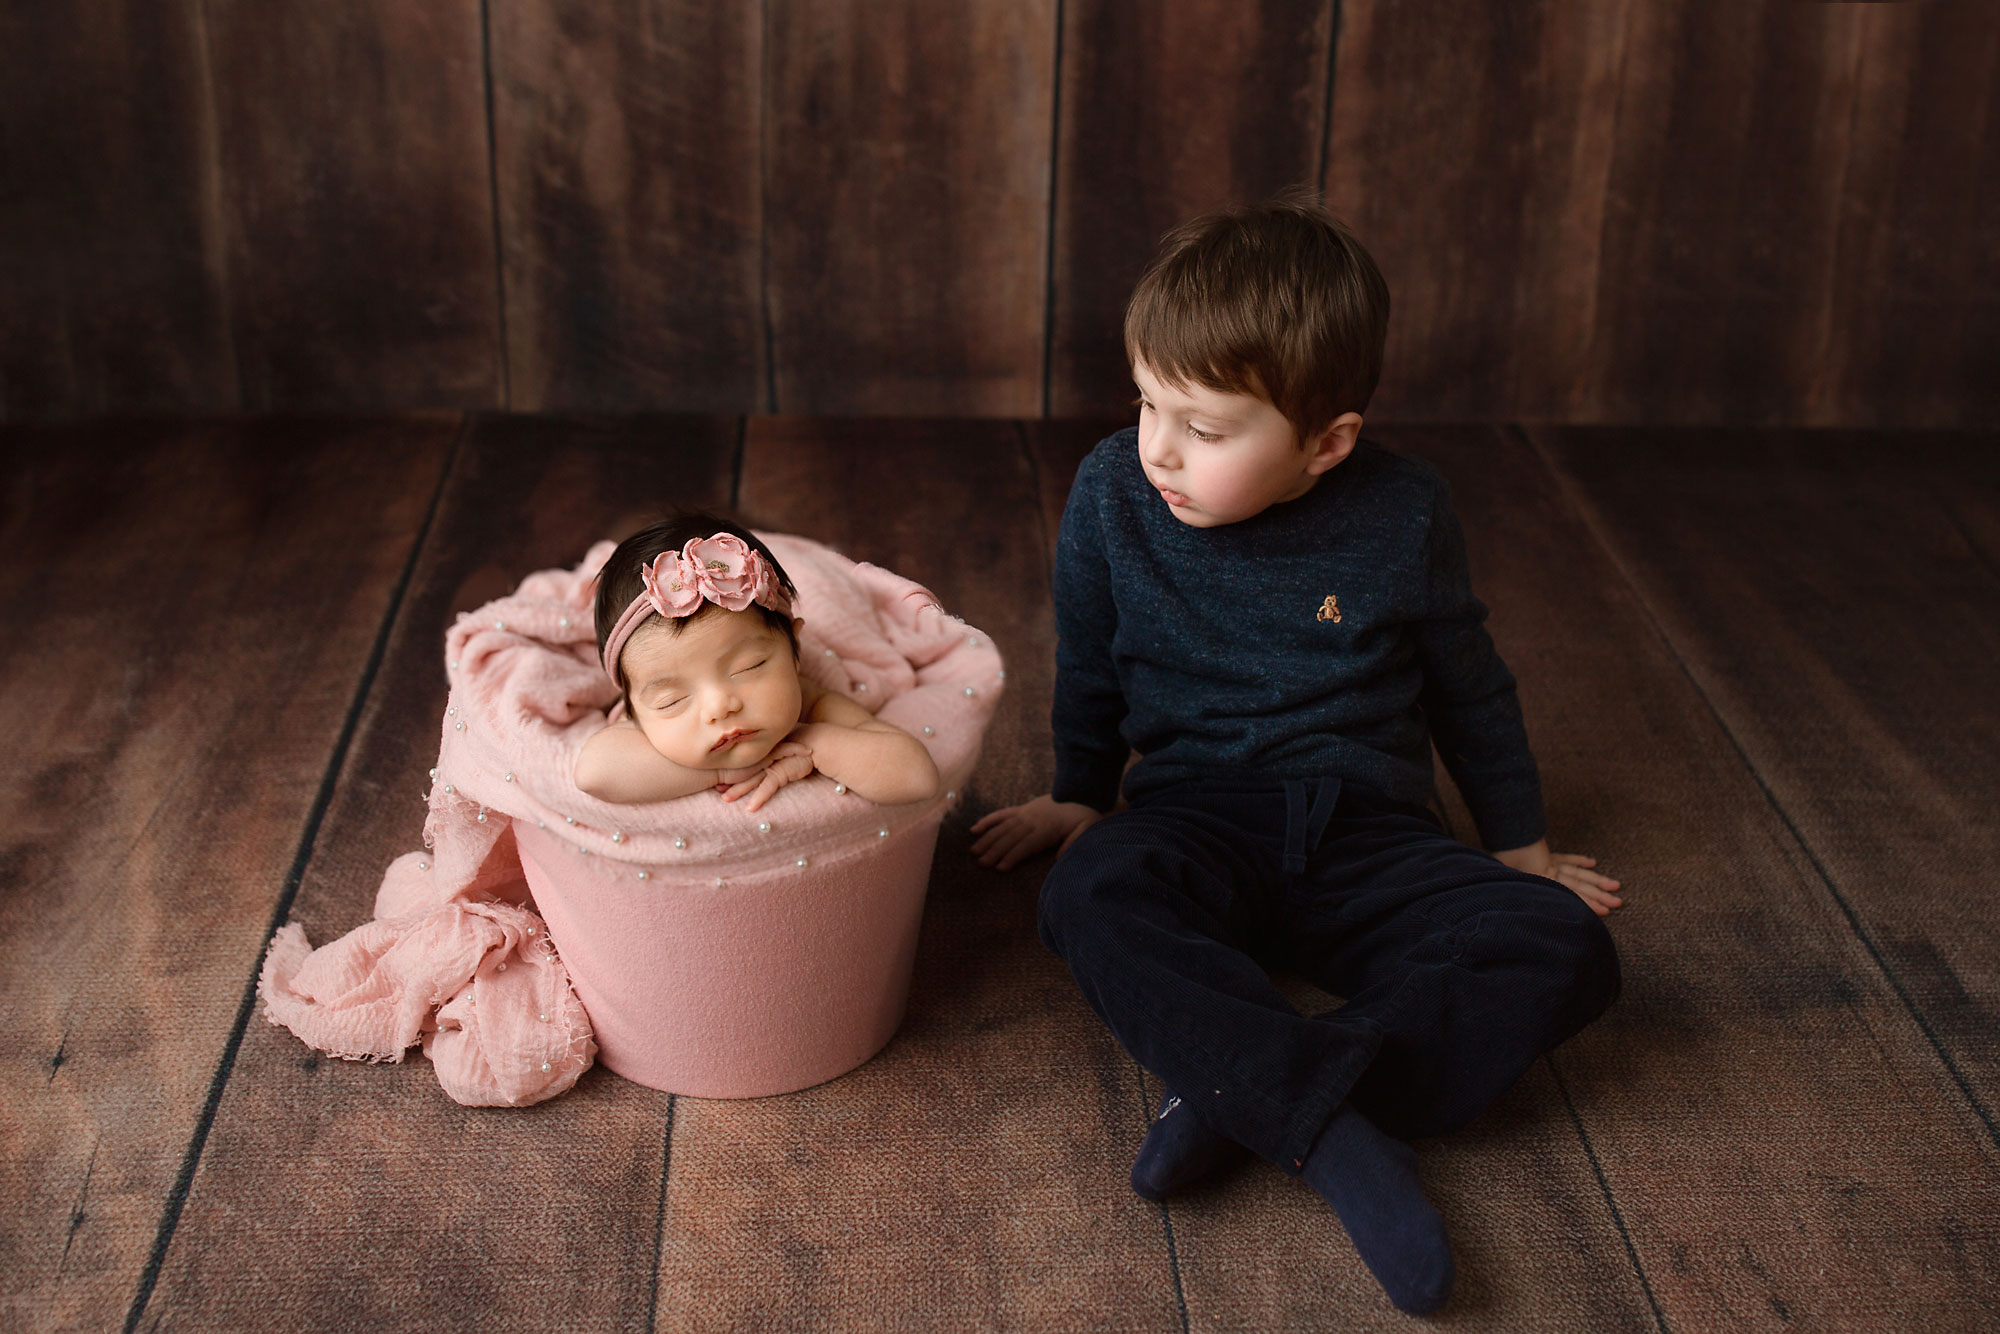 Passaic county newborn photographer photos of baby and older brother